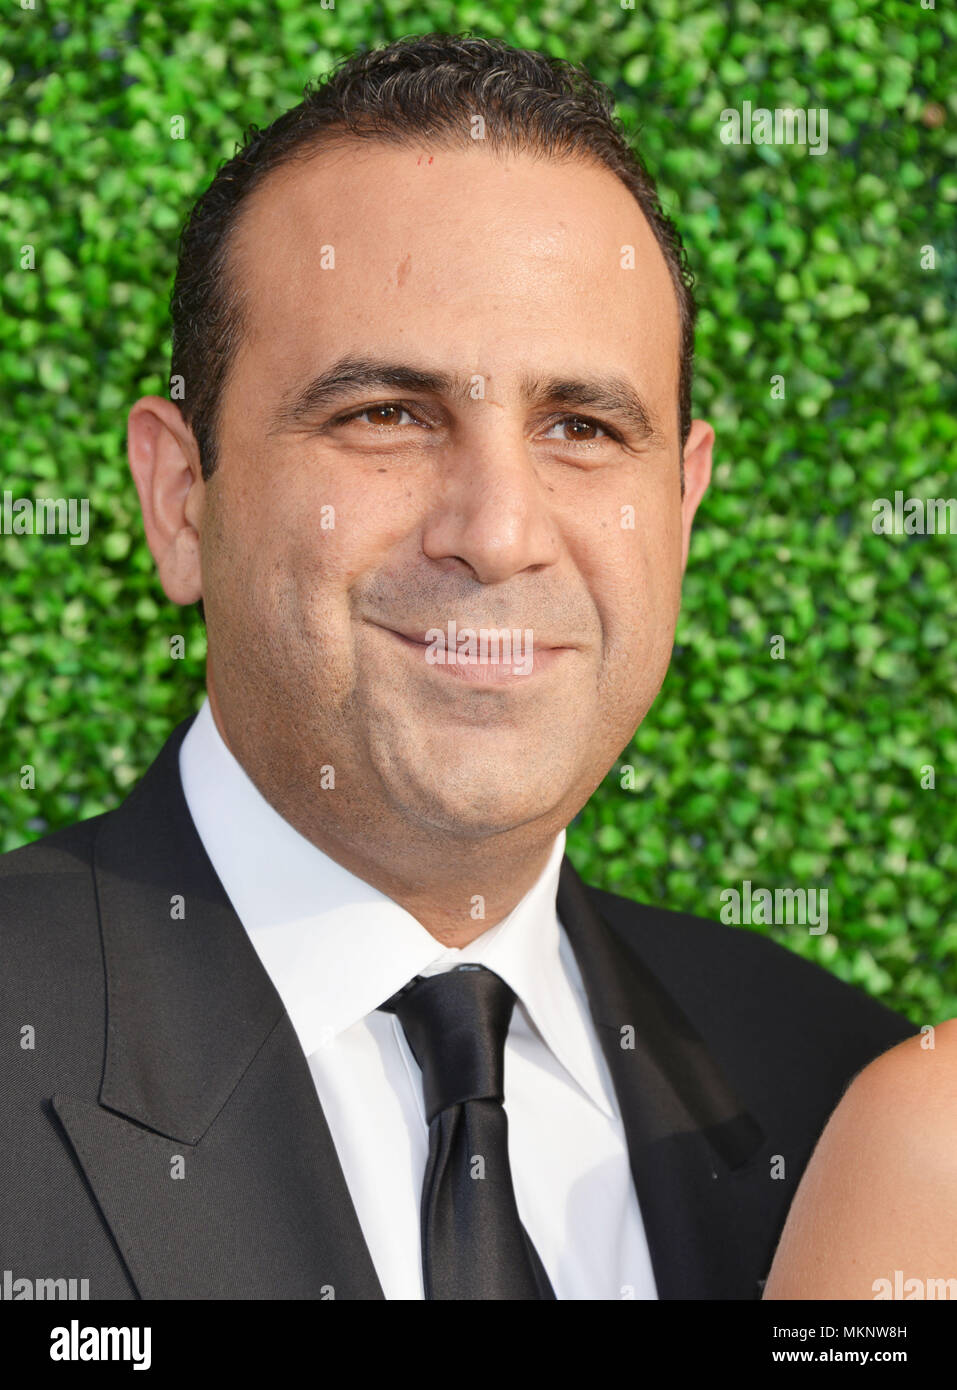 Sam Nazarian 103 at the UCLA Israel Studies Awards at the Annenberg Center for Performing Arts in Beverly Hills. May, 5, 2015.Sam Nazarian 103  Event in Hollywood Life - California,  Red Carpet Event, Vertical, USA, Film Industry, Celebrities,  Photography, Bestof, Arts Culture and Entertainment, Topix Celebrities fashion / one person, Vertical, Best of, Hollywood Life, Event in Hollywood Life - California,  Red Carpet and backstage, USA, Film Industry, Celebrities,  movie celebrities, TV celebrities, Music celebrities, Photography, Bestof, Arts Culture and Entertainment,  Topix, headshot, ver Stock Photo